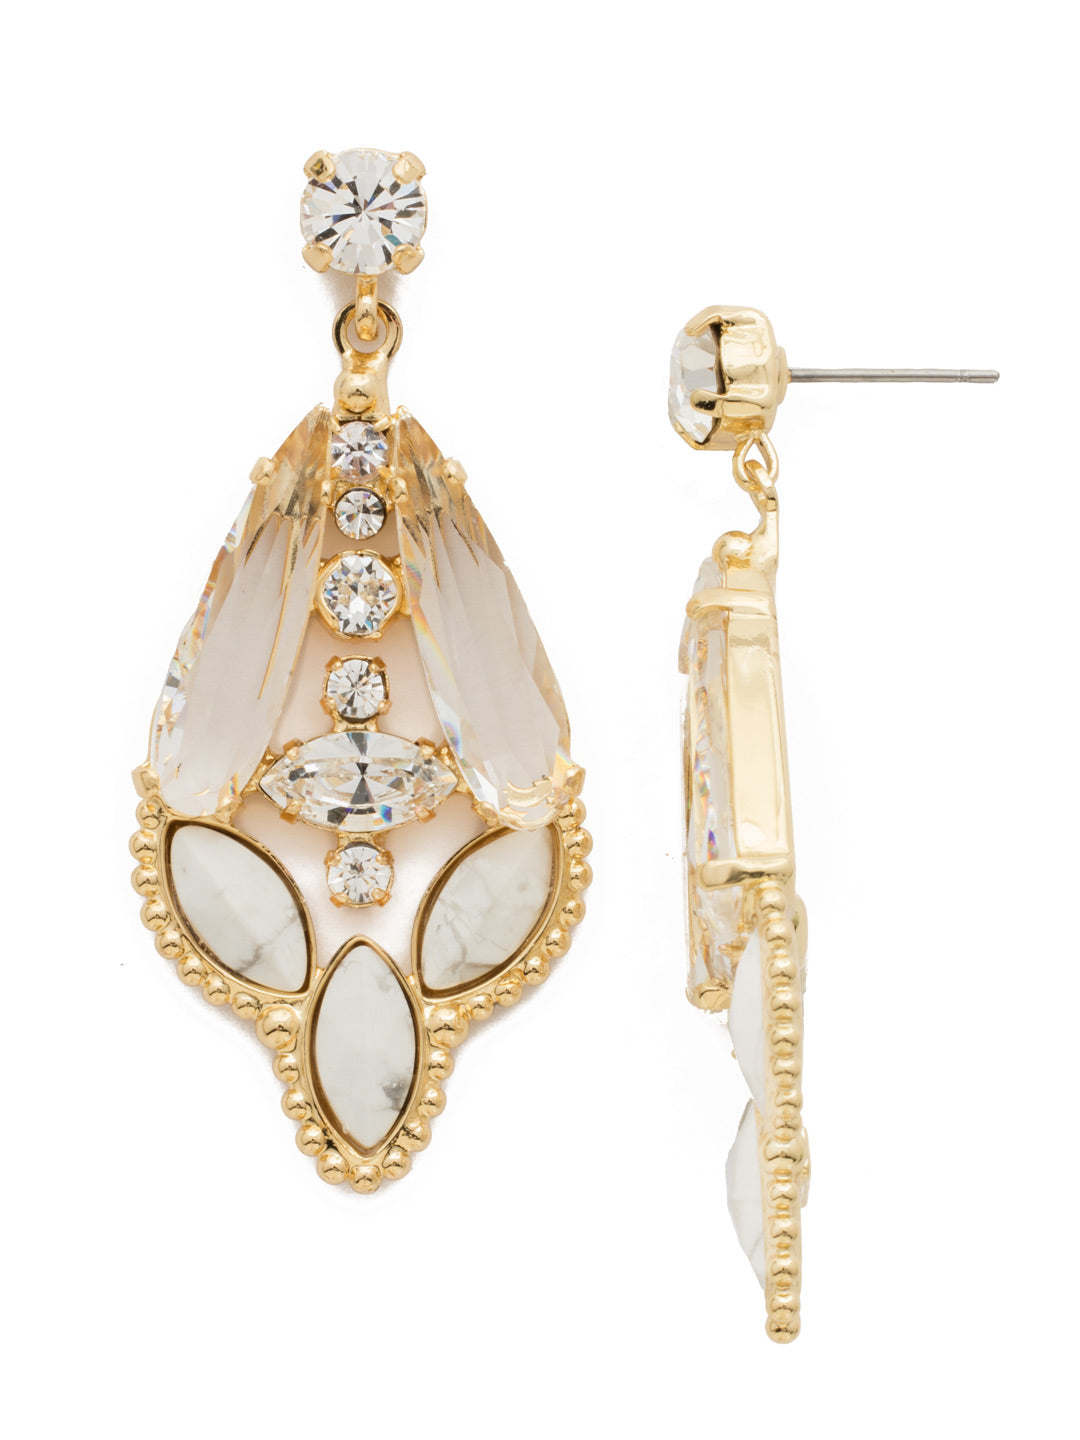 Brilliant Boho Earring - EDN97BGCRY - <p>A fun design perfect for everyday styling! The unique combination of crystals and cabochons creates this bohemian vibe. From Sorrelli's Crystal collection in our Bright Gold-tone finish.</p>